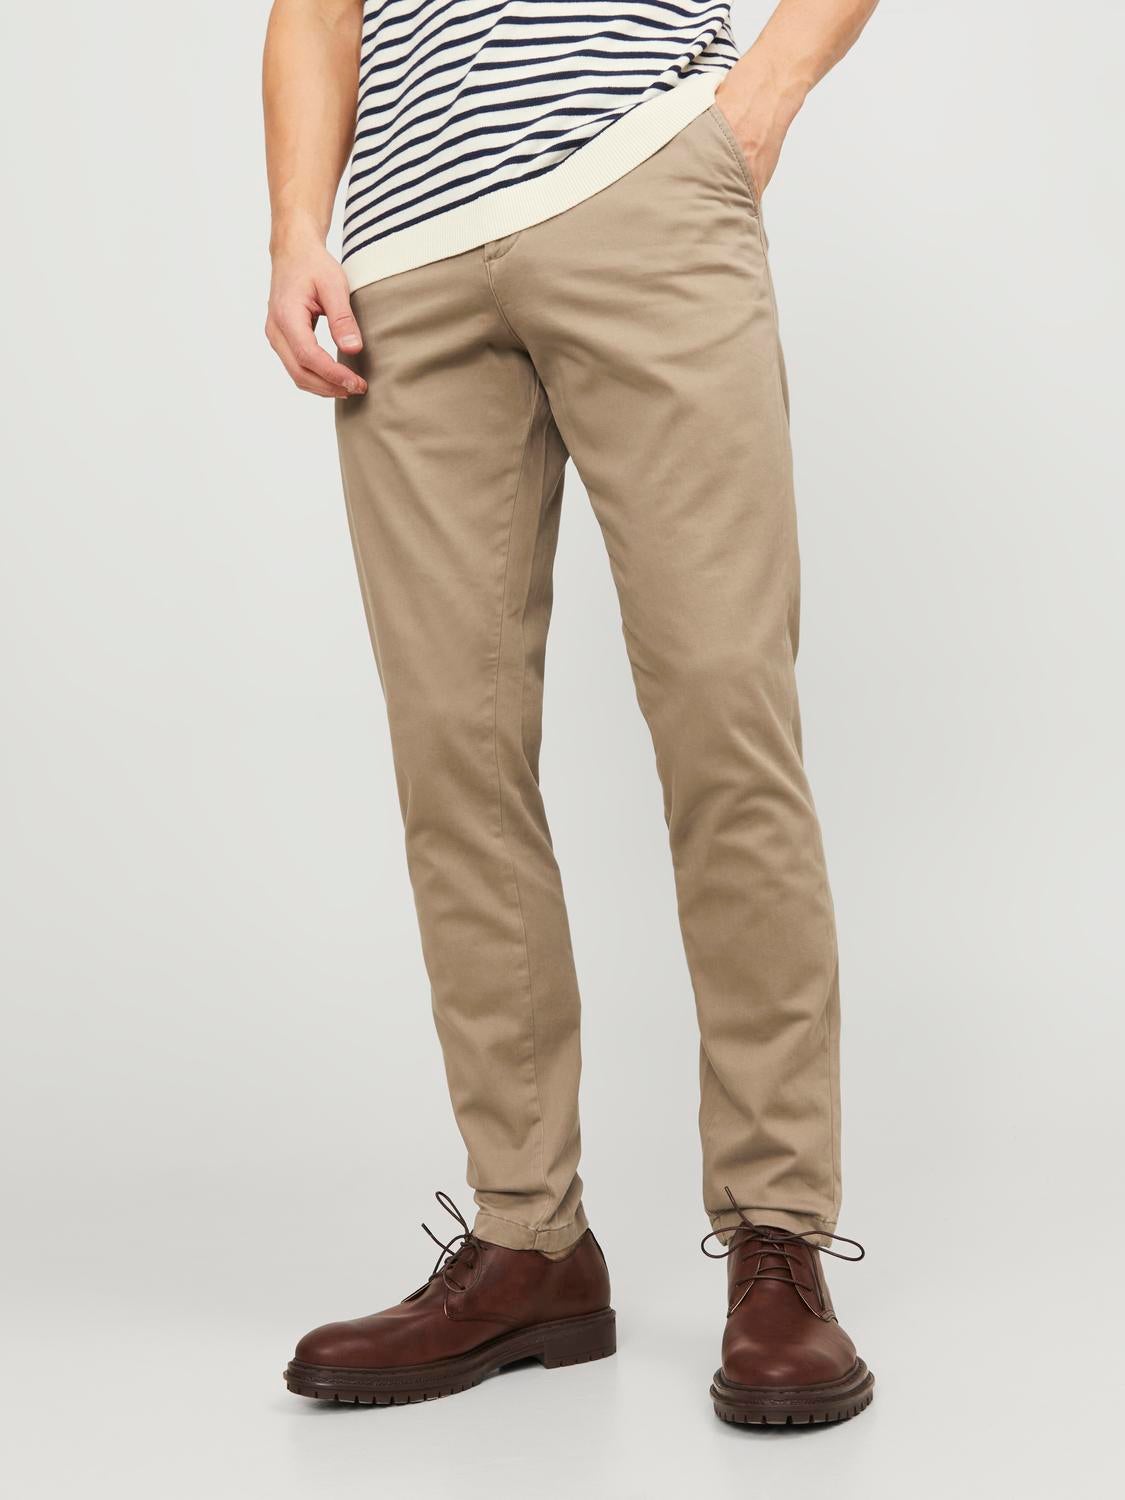 Khaki Chinos with Grey Shoes Outfits 211 ideas  outfits  Lookastic